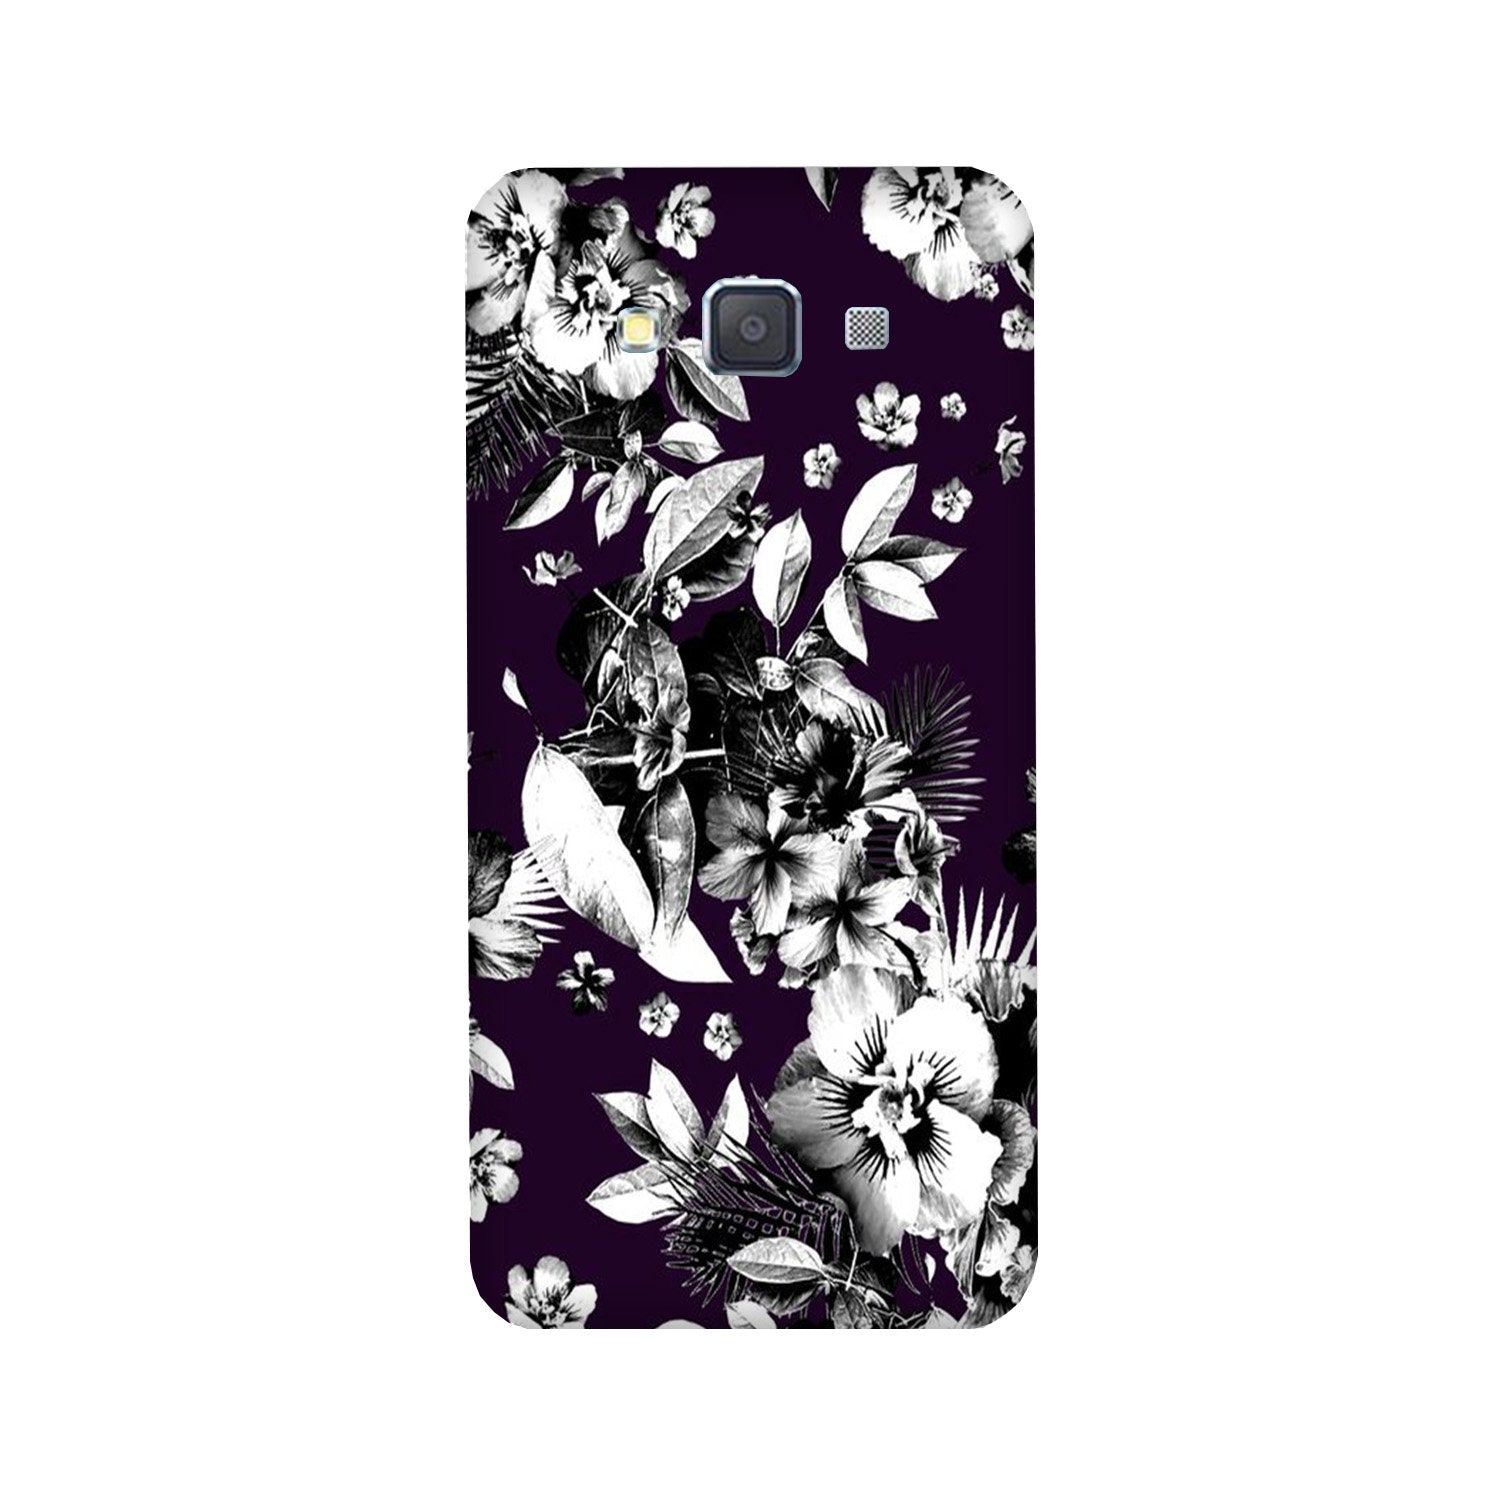 white flowers Case for Galaxy Grand 2